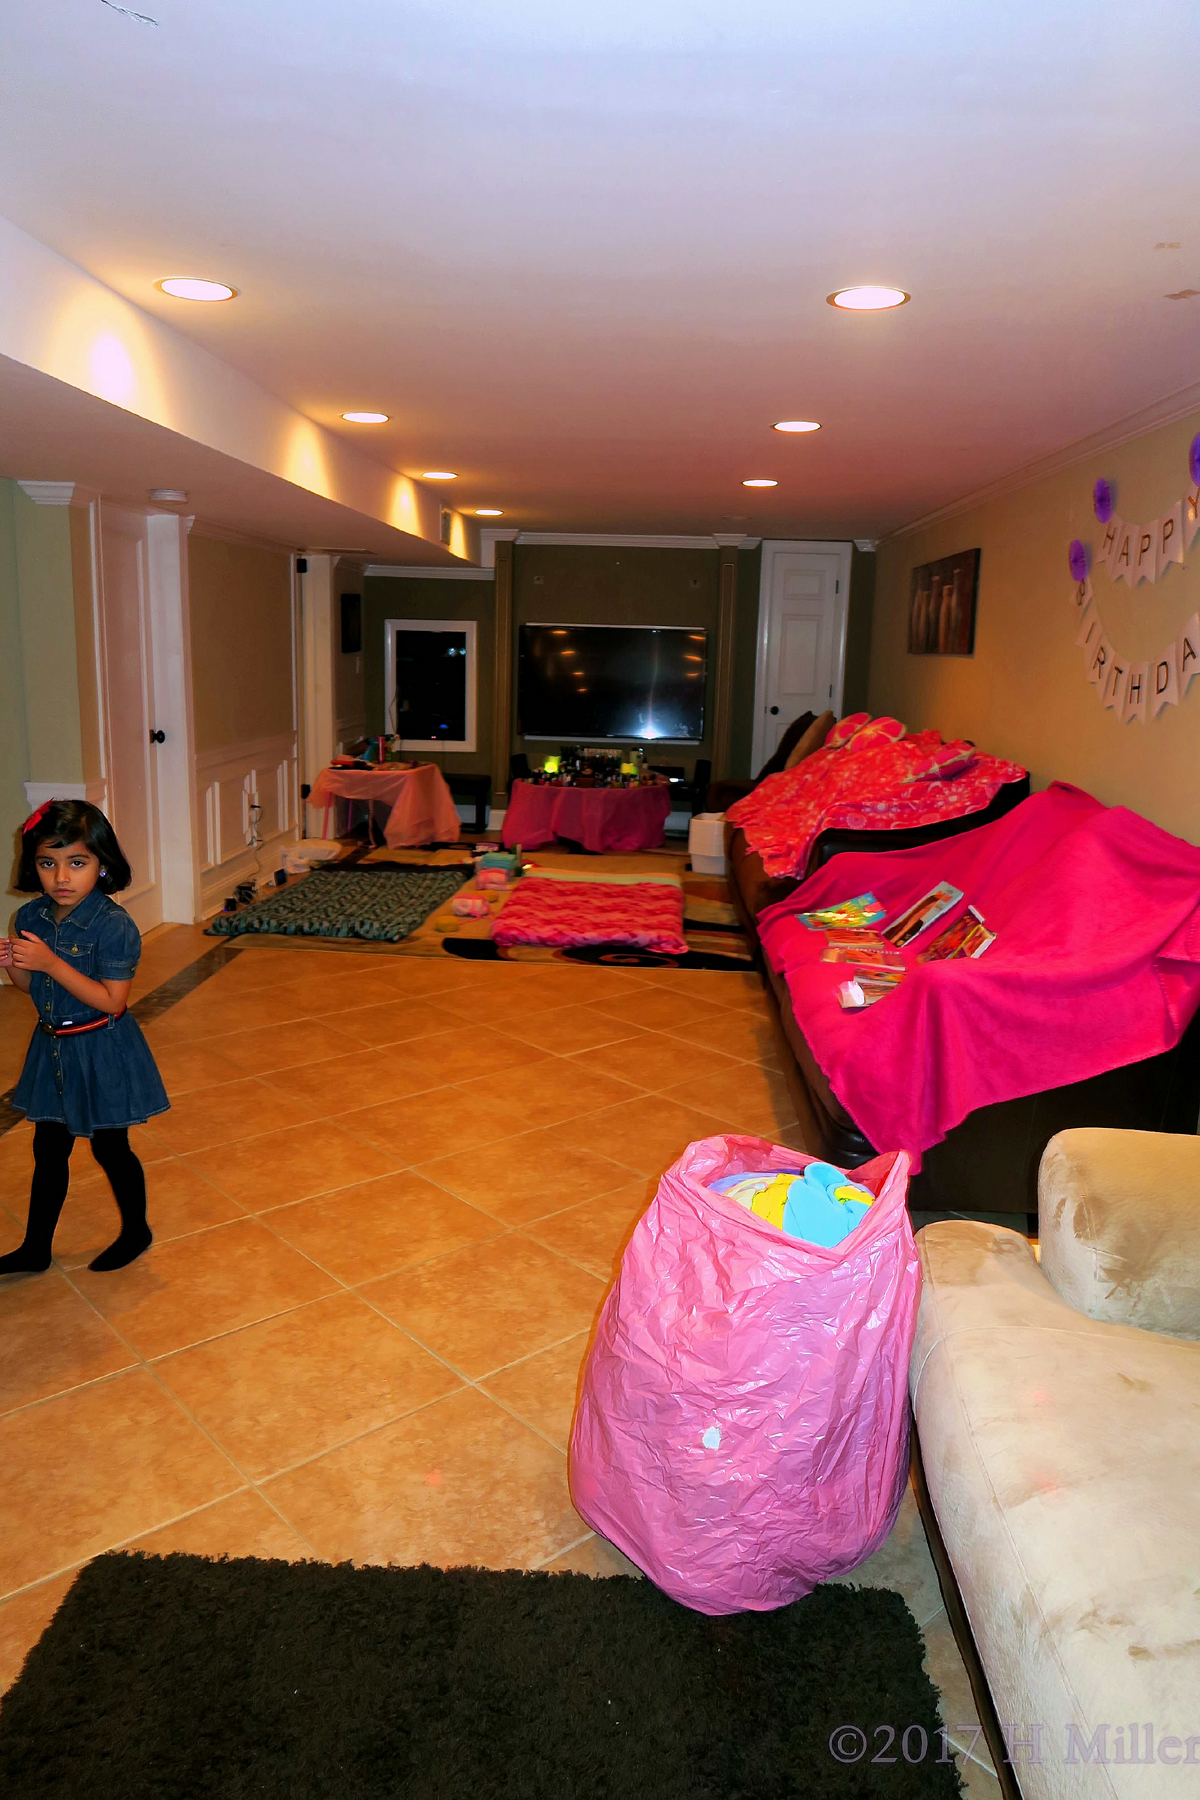 A Long Shot Of The Kids Spa Party Room. 